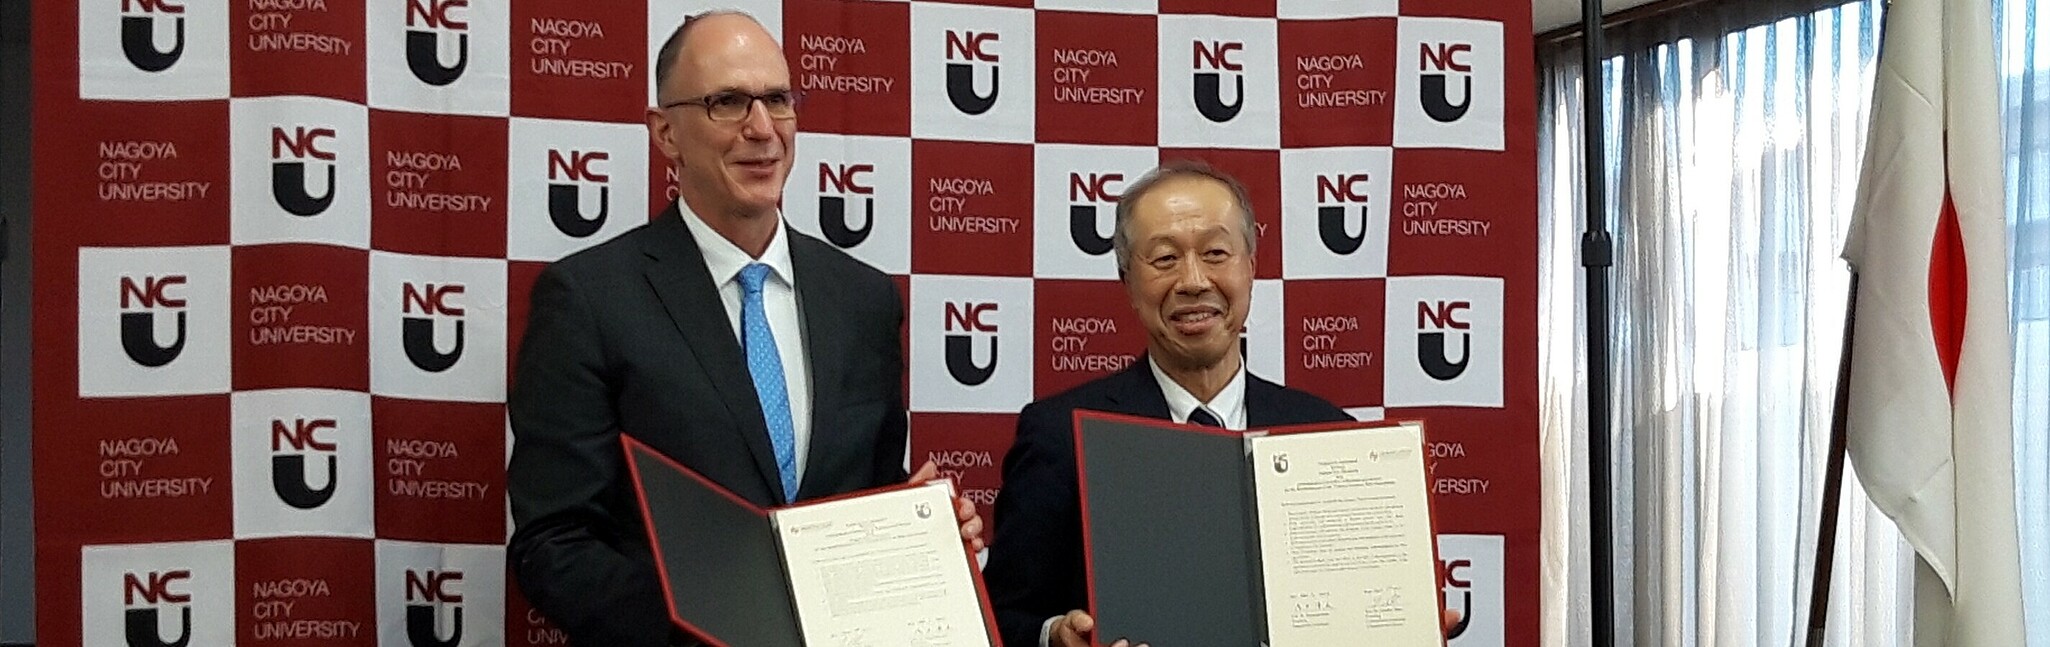 Signing of the agreement on the intensified partnership of HWG LU and Nagoya City University by the presidents (from left) Prof. Dr. Gunther Piller and Prof. Dr. Kiyofumi Asai. (Image: NCU)